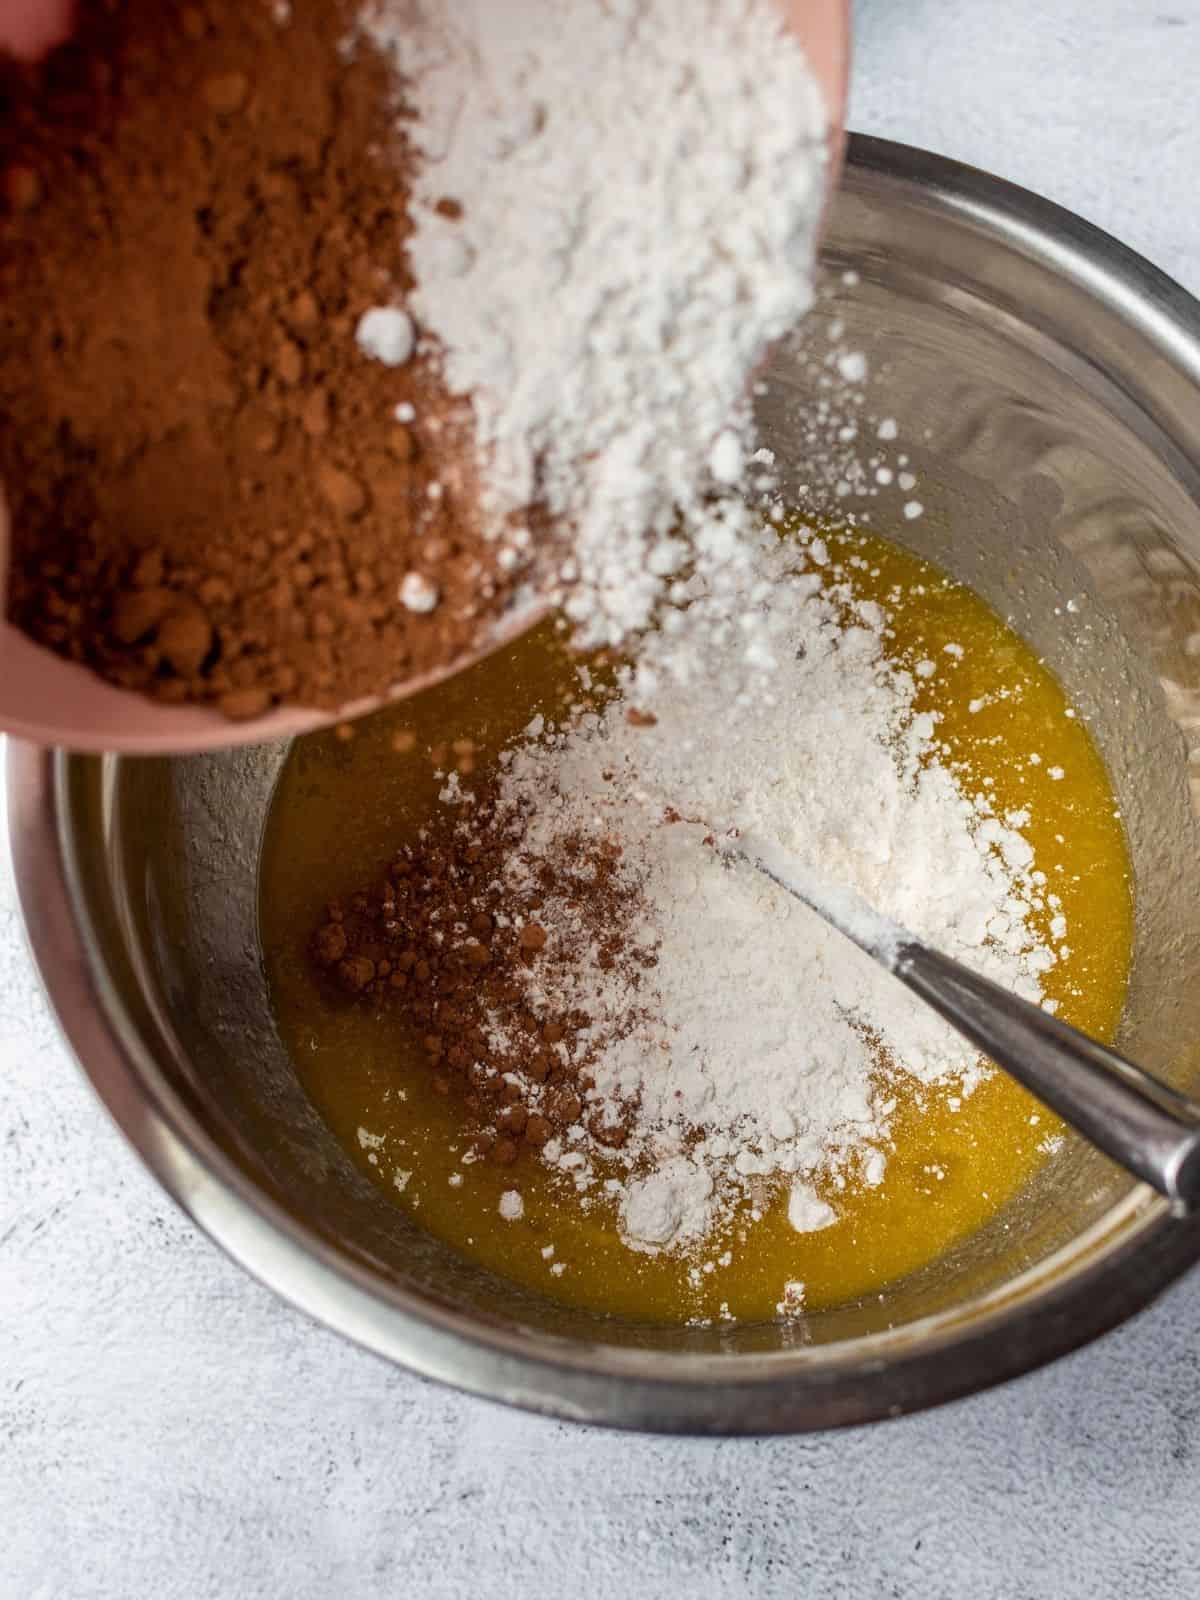 Add dry ingredients to wet ingredients for homemade chocolate brownies.